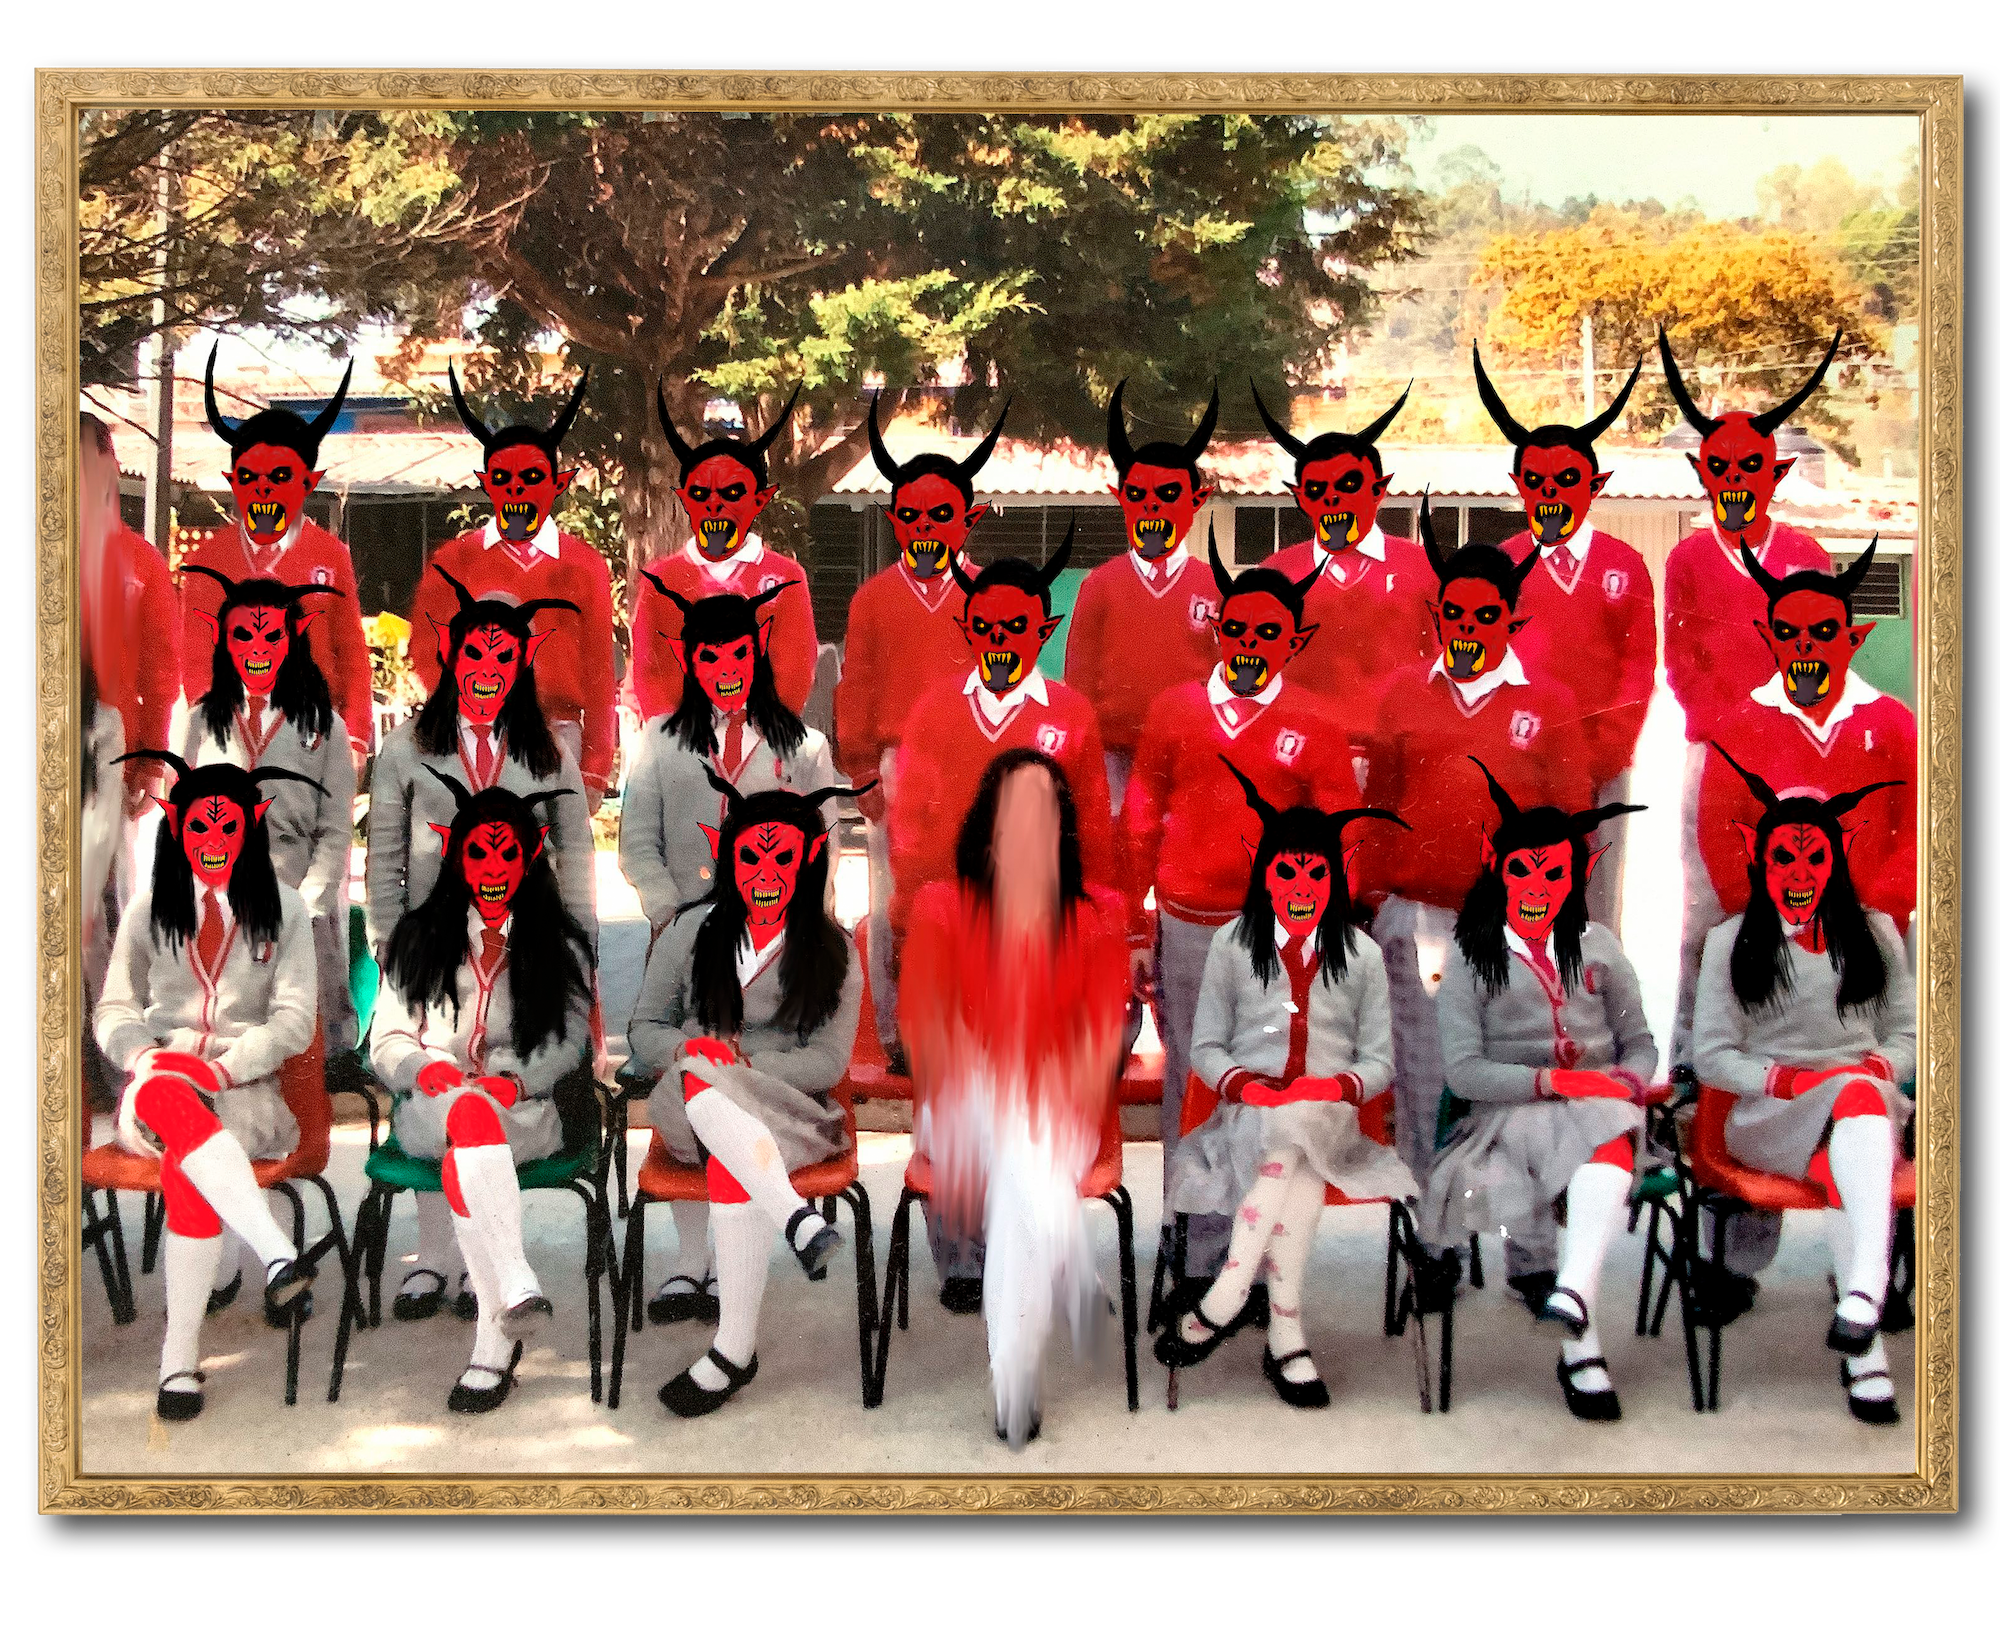 School group photo with several young men and women, whose faces are all manipulated and drawn on to resemble devils.